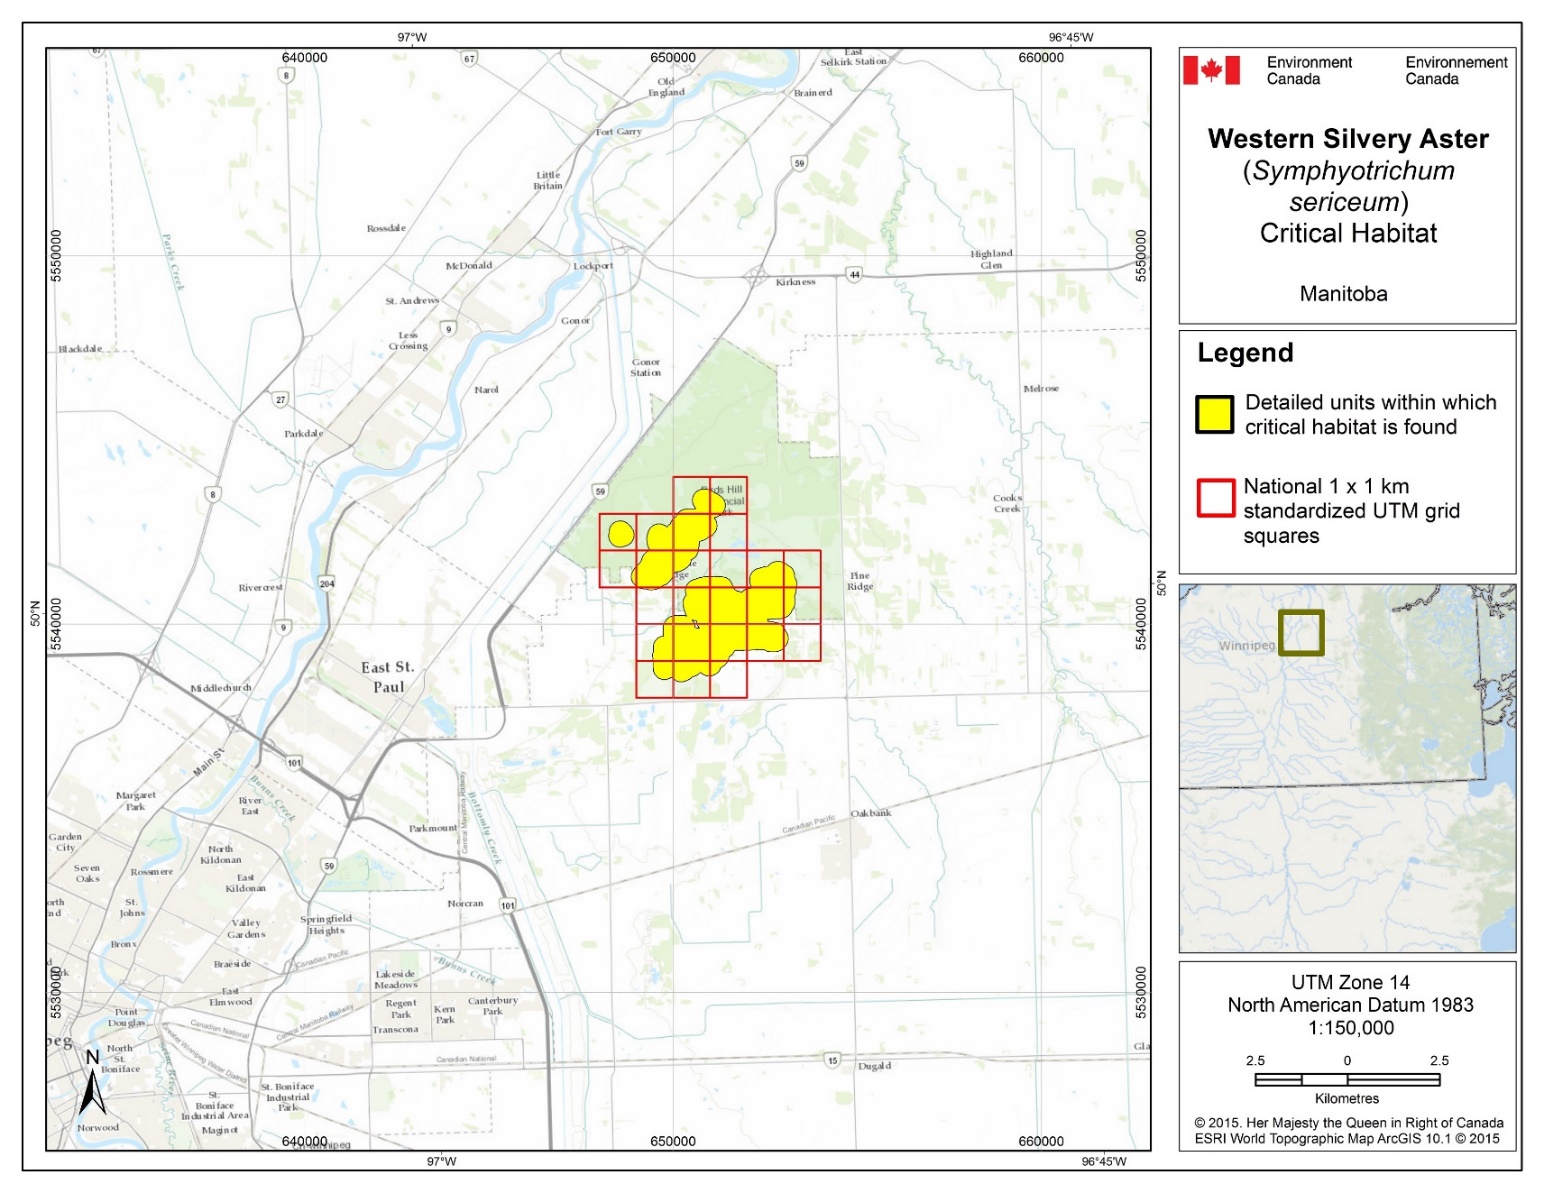 Figure B5: Map of Critical habitat for Western Silvery Aster in Manitoba